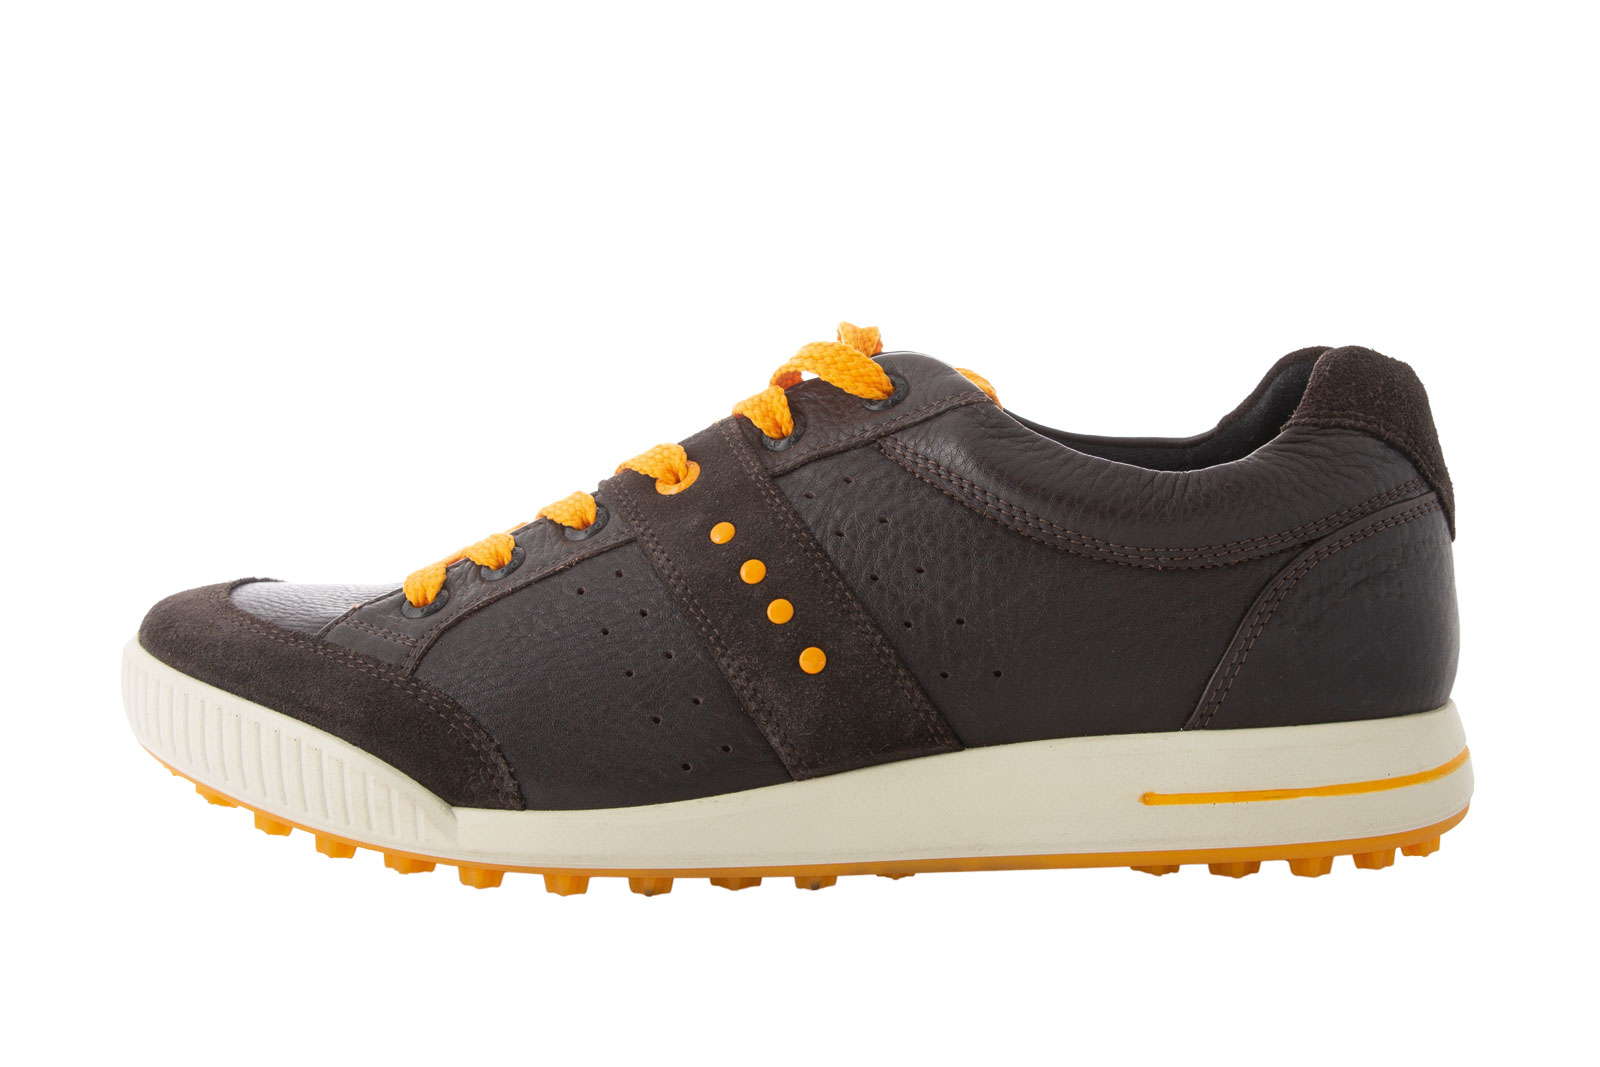 25 Years of ECCO Golf, 2010: ECCO GOLF STREET - the iconic golf shoe started there hybrid revolution